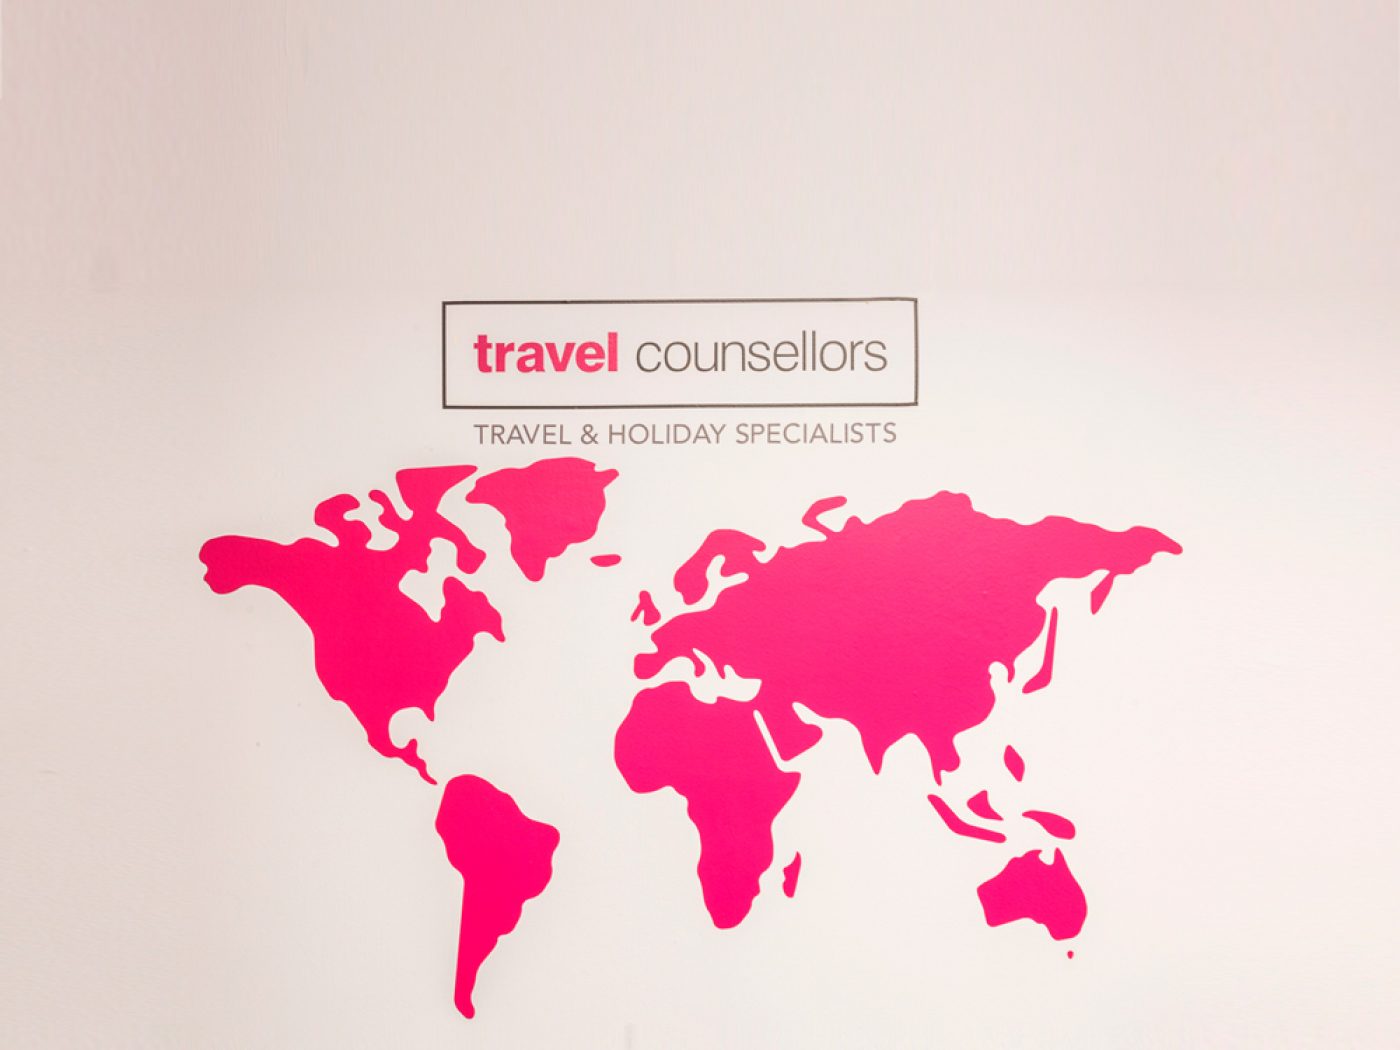 Office branding incorporated into a pink world map showcasing travel counselors.